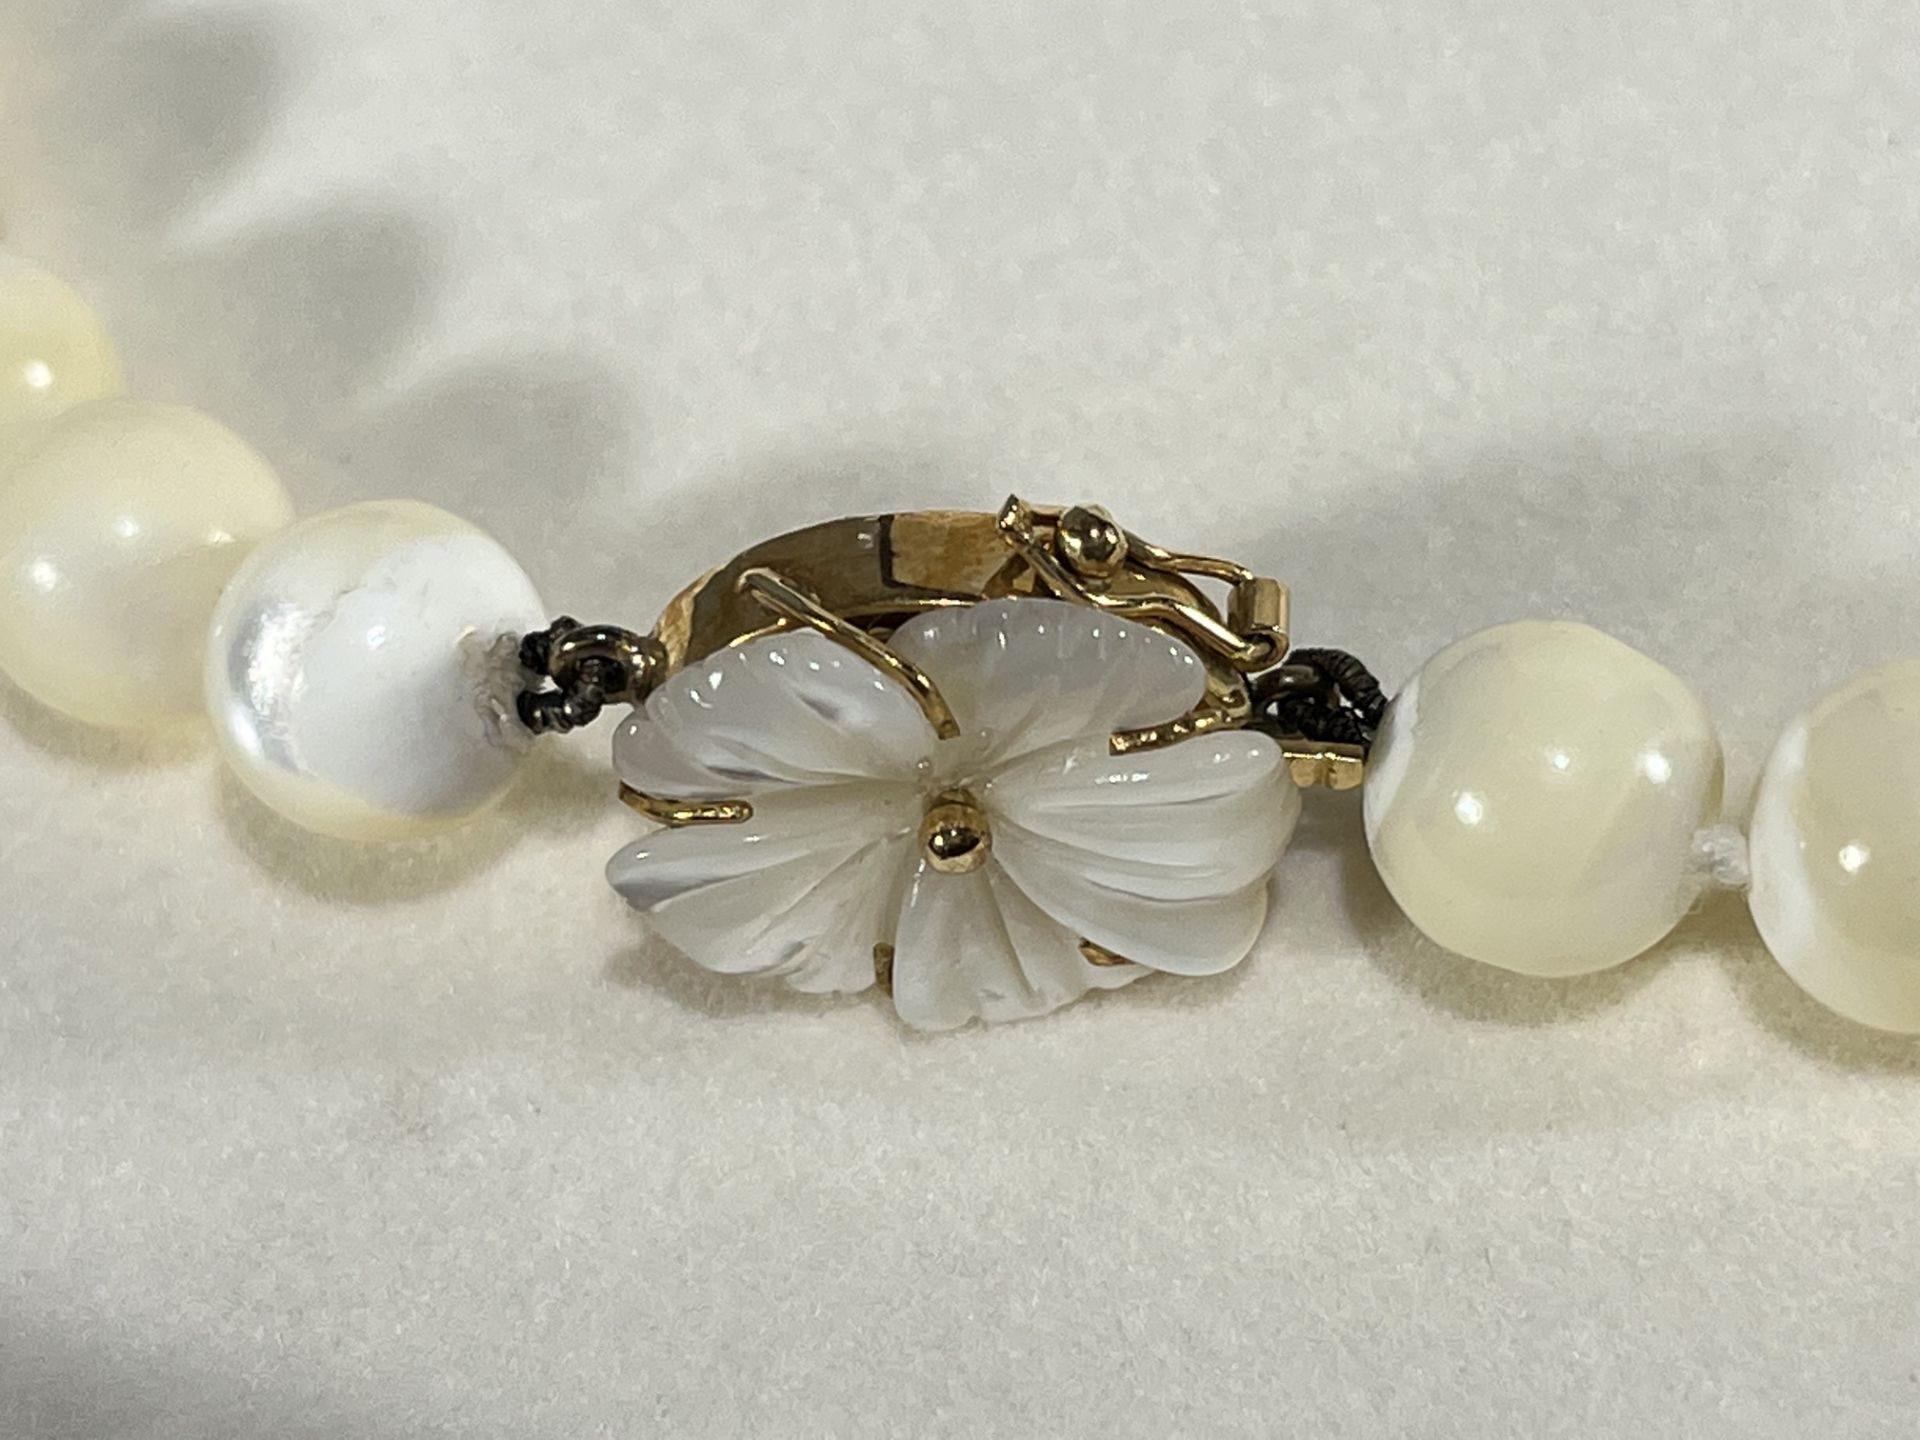 Elegant mother-of-pearl and mother-of-pearl necklace, mounted in 18k gold - Image 4 of 5